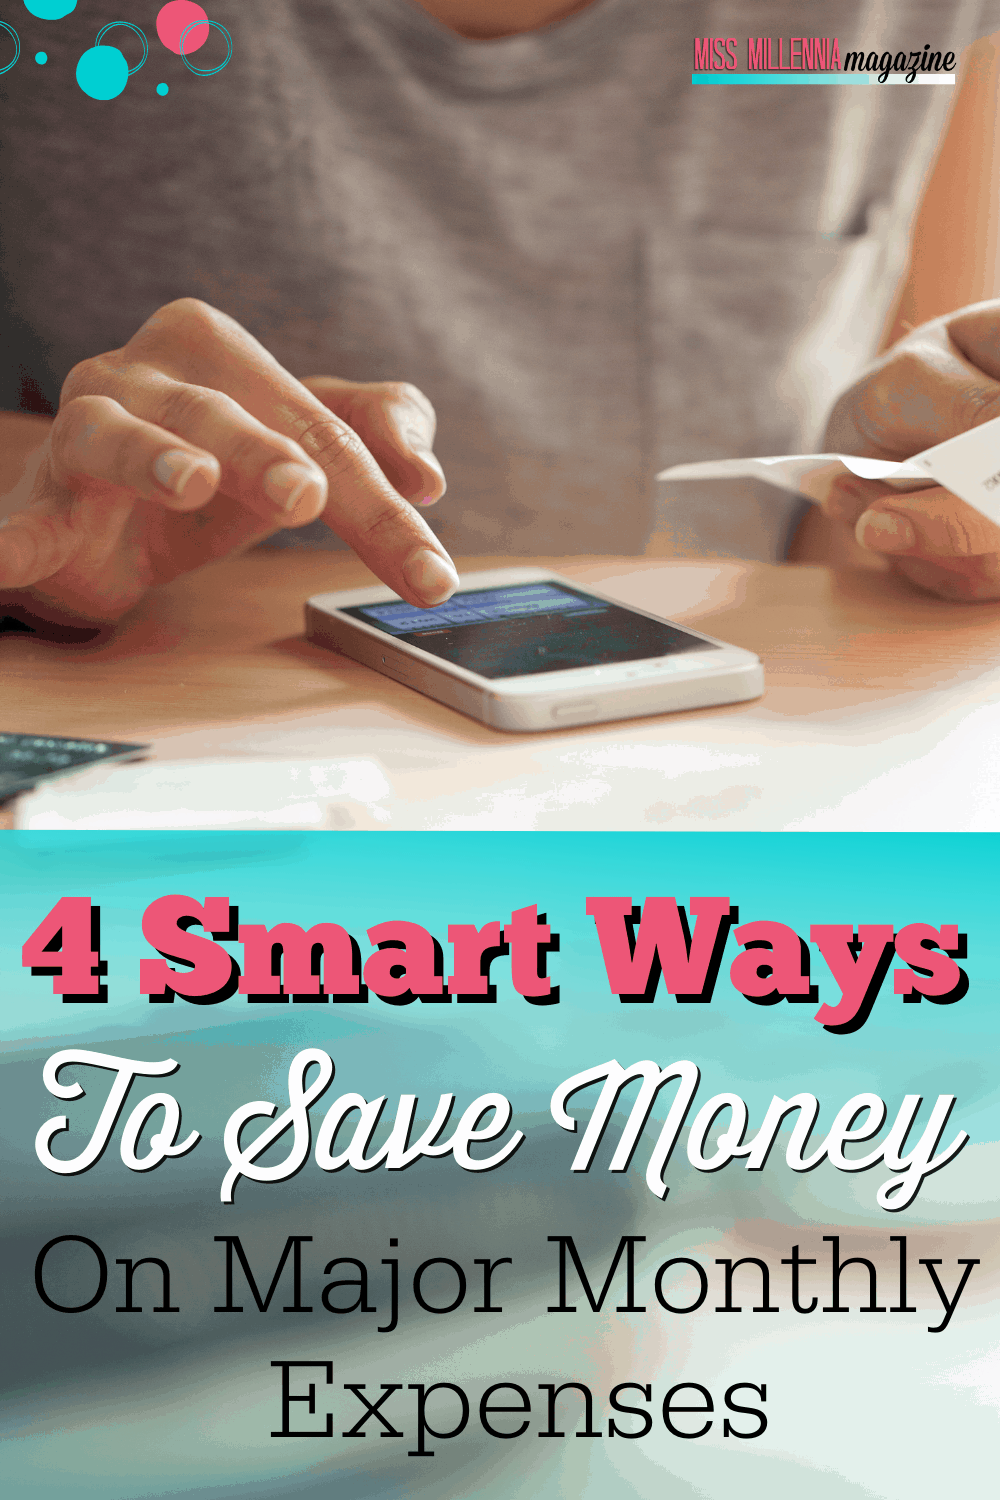 4 Smart Ways To Save Money On Major Monthly Expenses